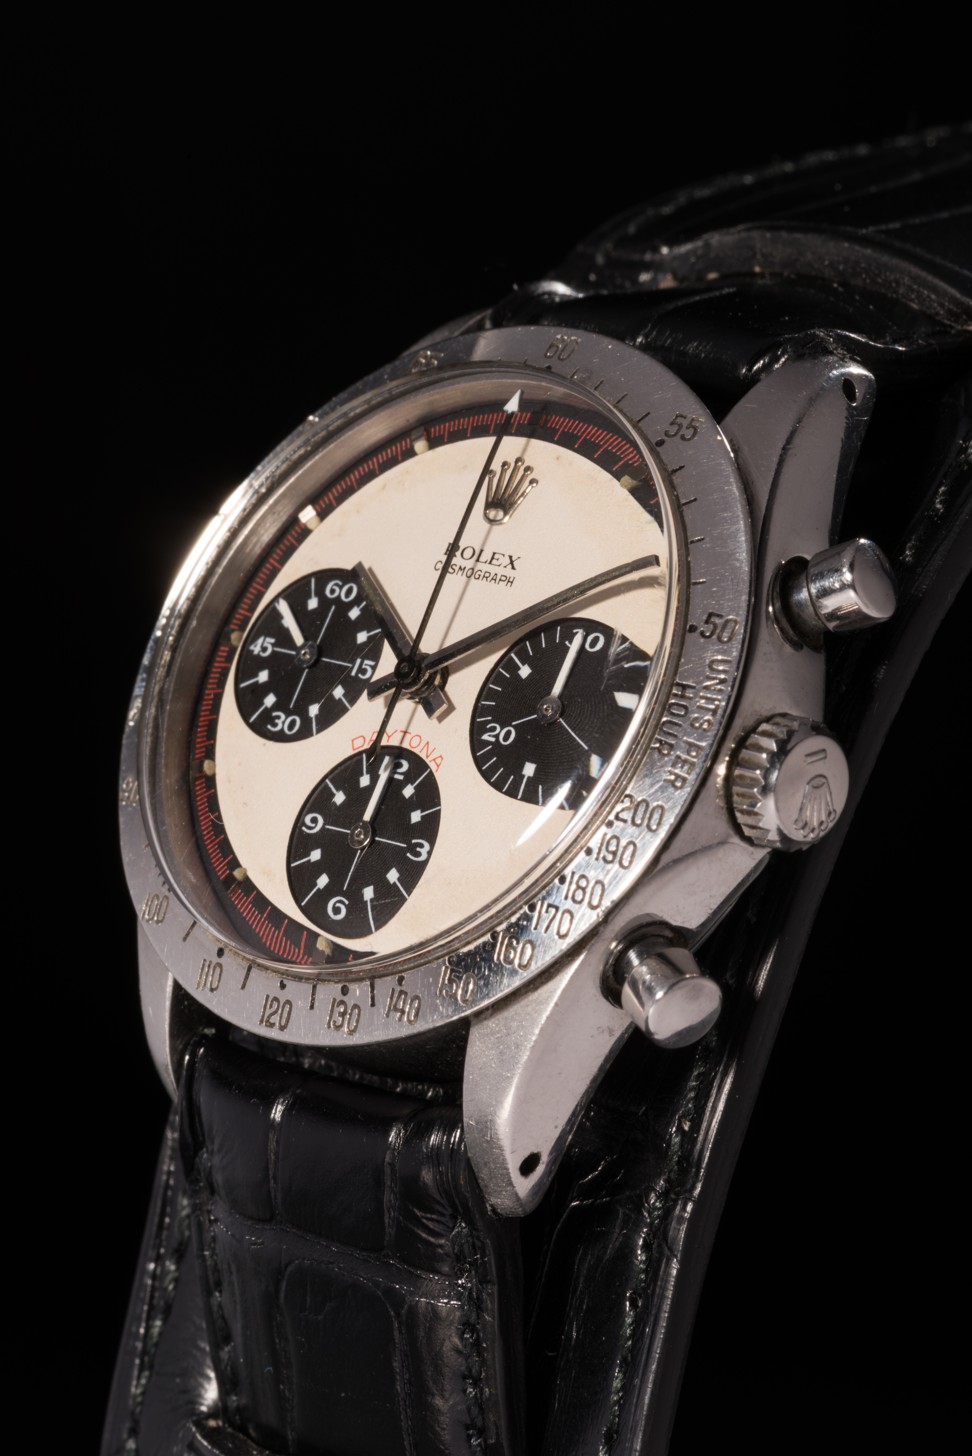 Rolex Paul Newman Cosmograph Daytona actually worn by Paul Newman up for sale at Philips in New York.